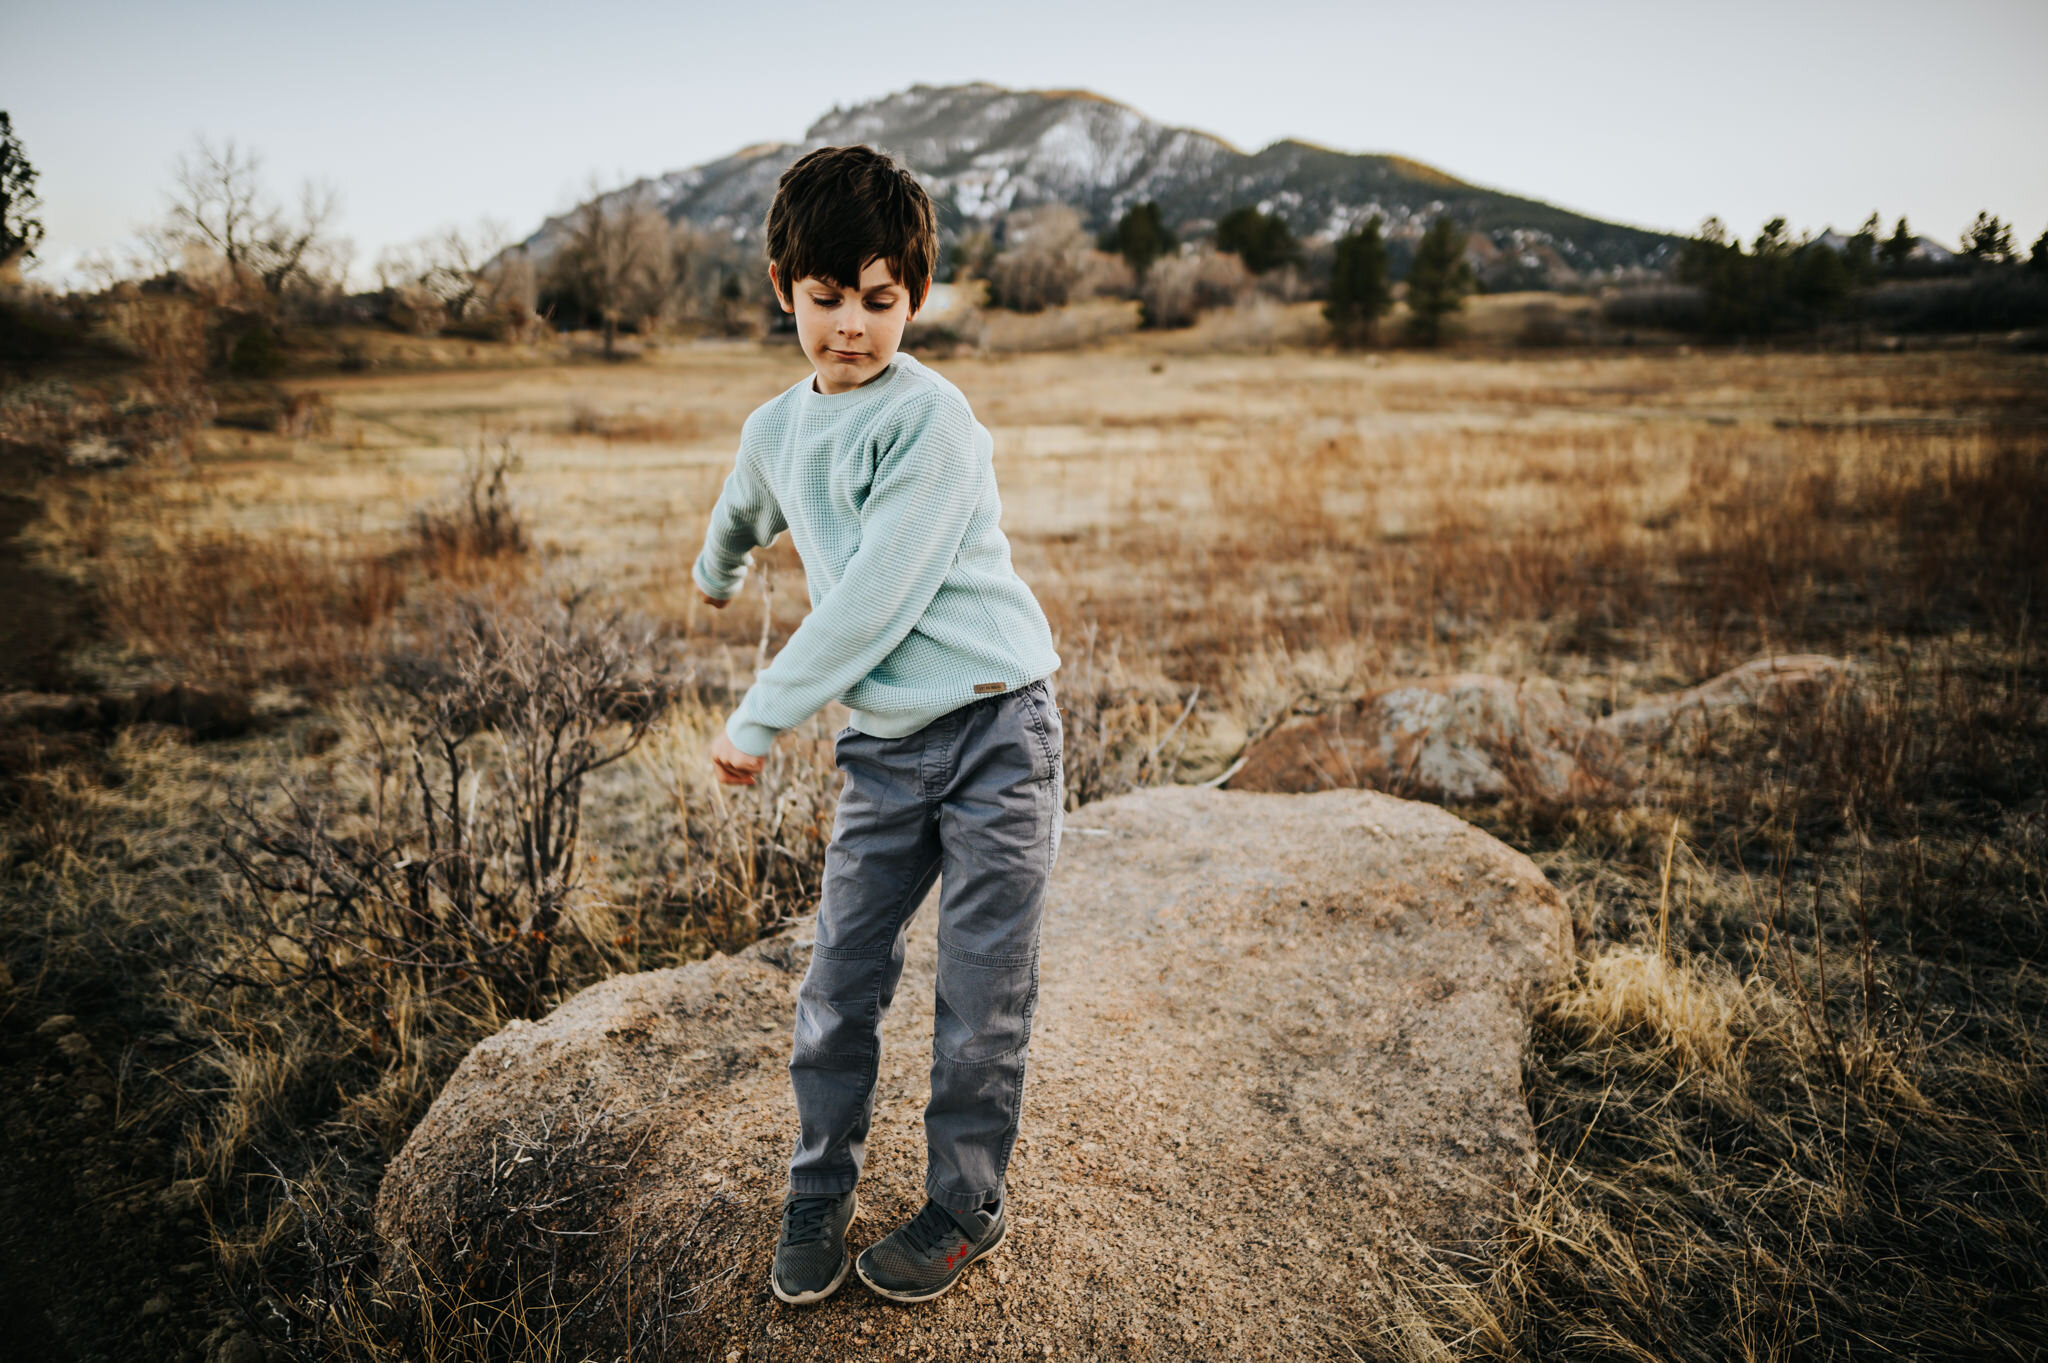 Lisa Liberati Family Session Colorado Springs Photographer Sunset Cheyenne Canyon Mother Father Son Daughter Wild Prairie Photography-11-2020.jpg